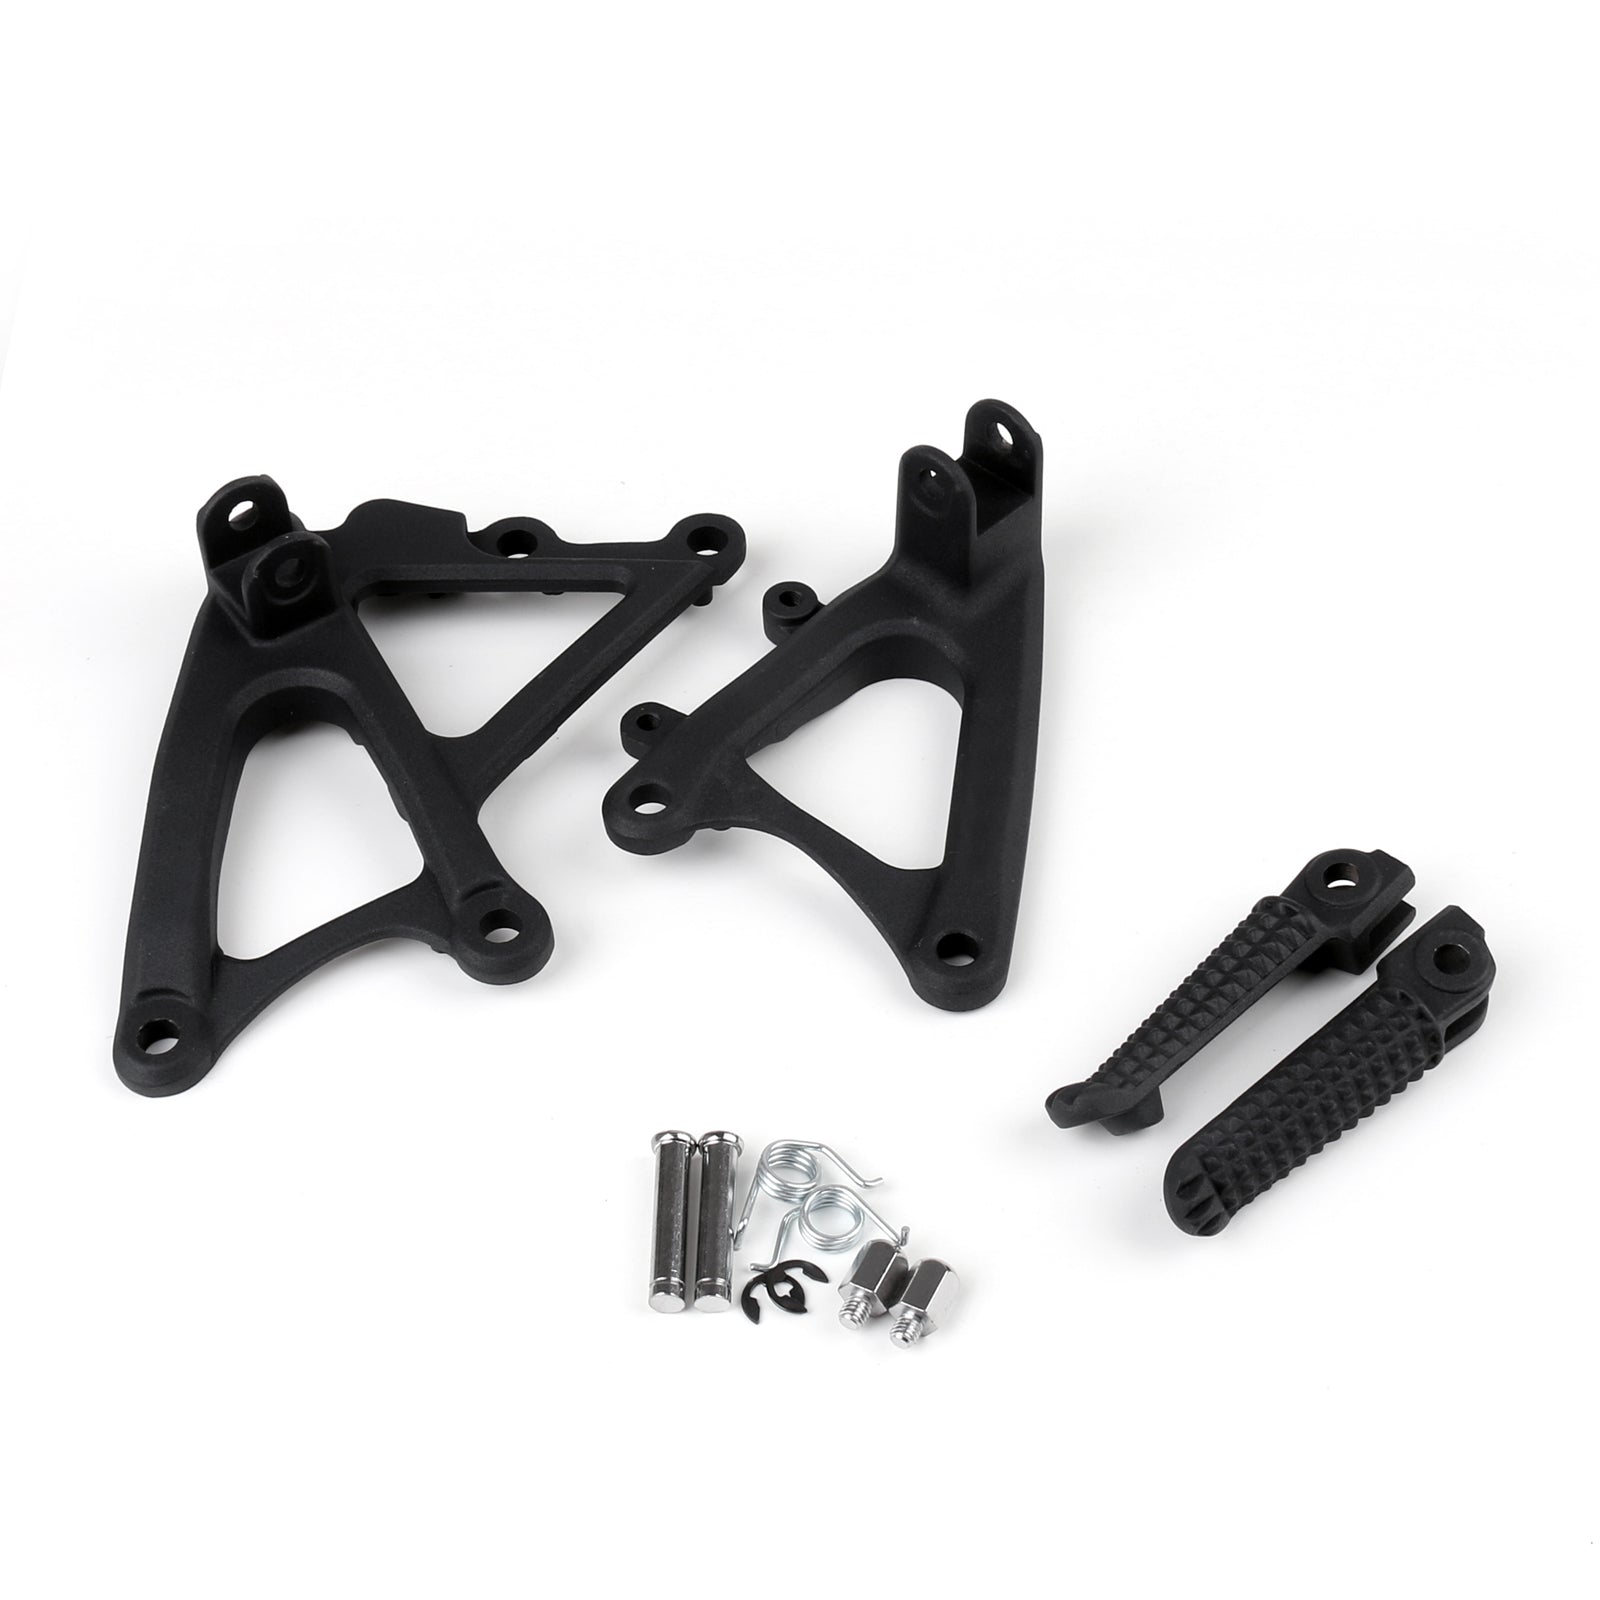 Front Rider Footrest Foot pegs Brackets Set For Yamaha YZF R1 2009-2011 Black